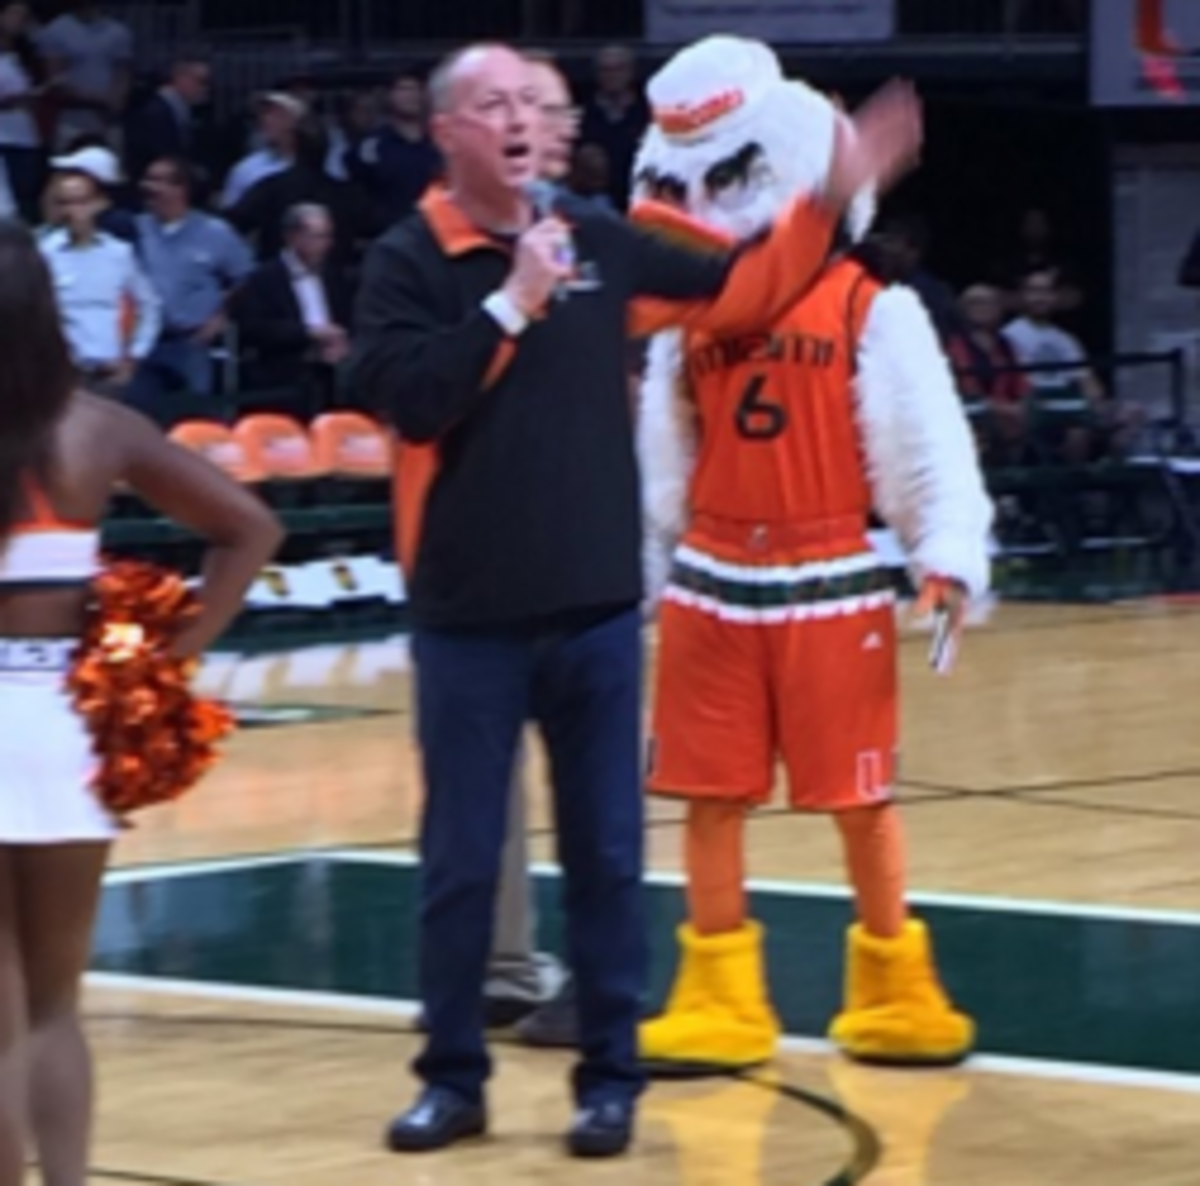 Jim Kelly gives speech at halftime of Miami basketball game.